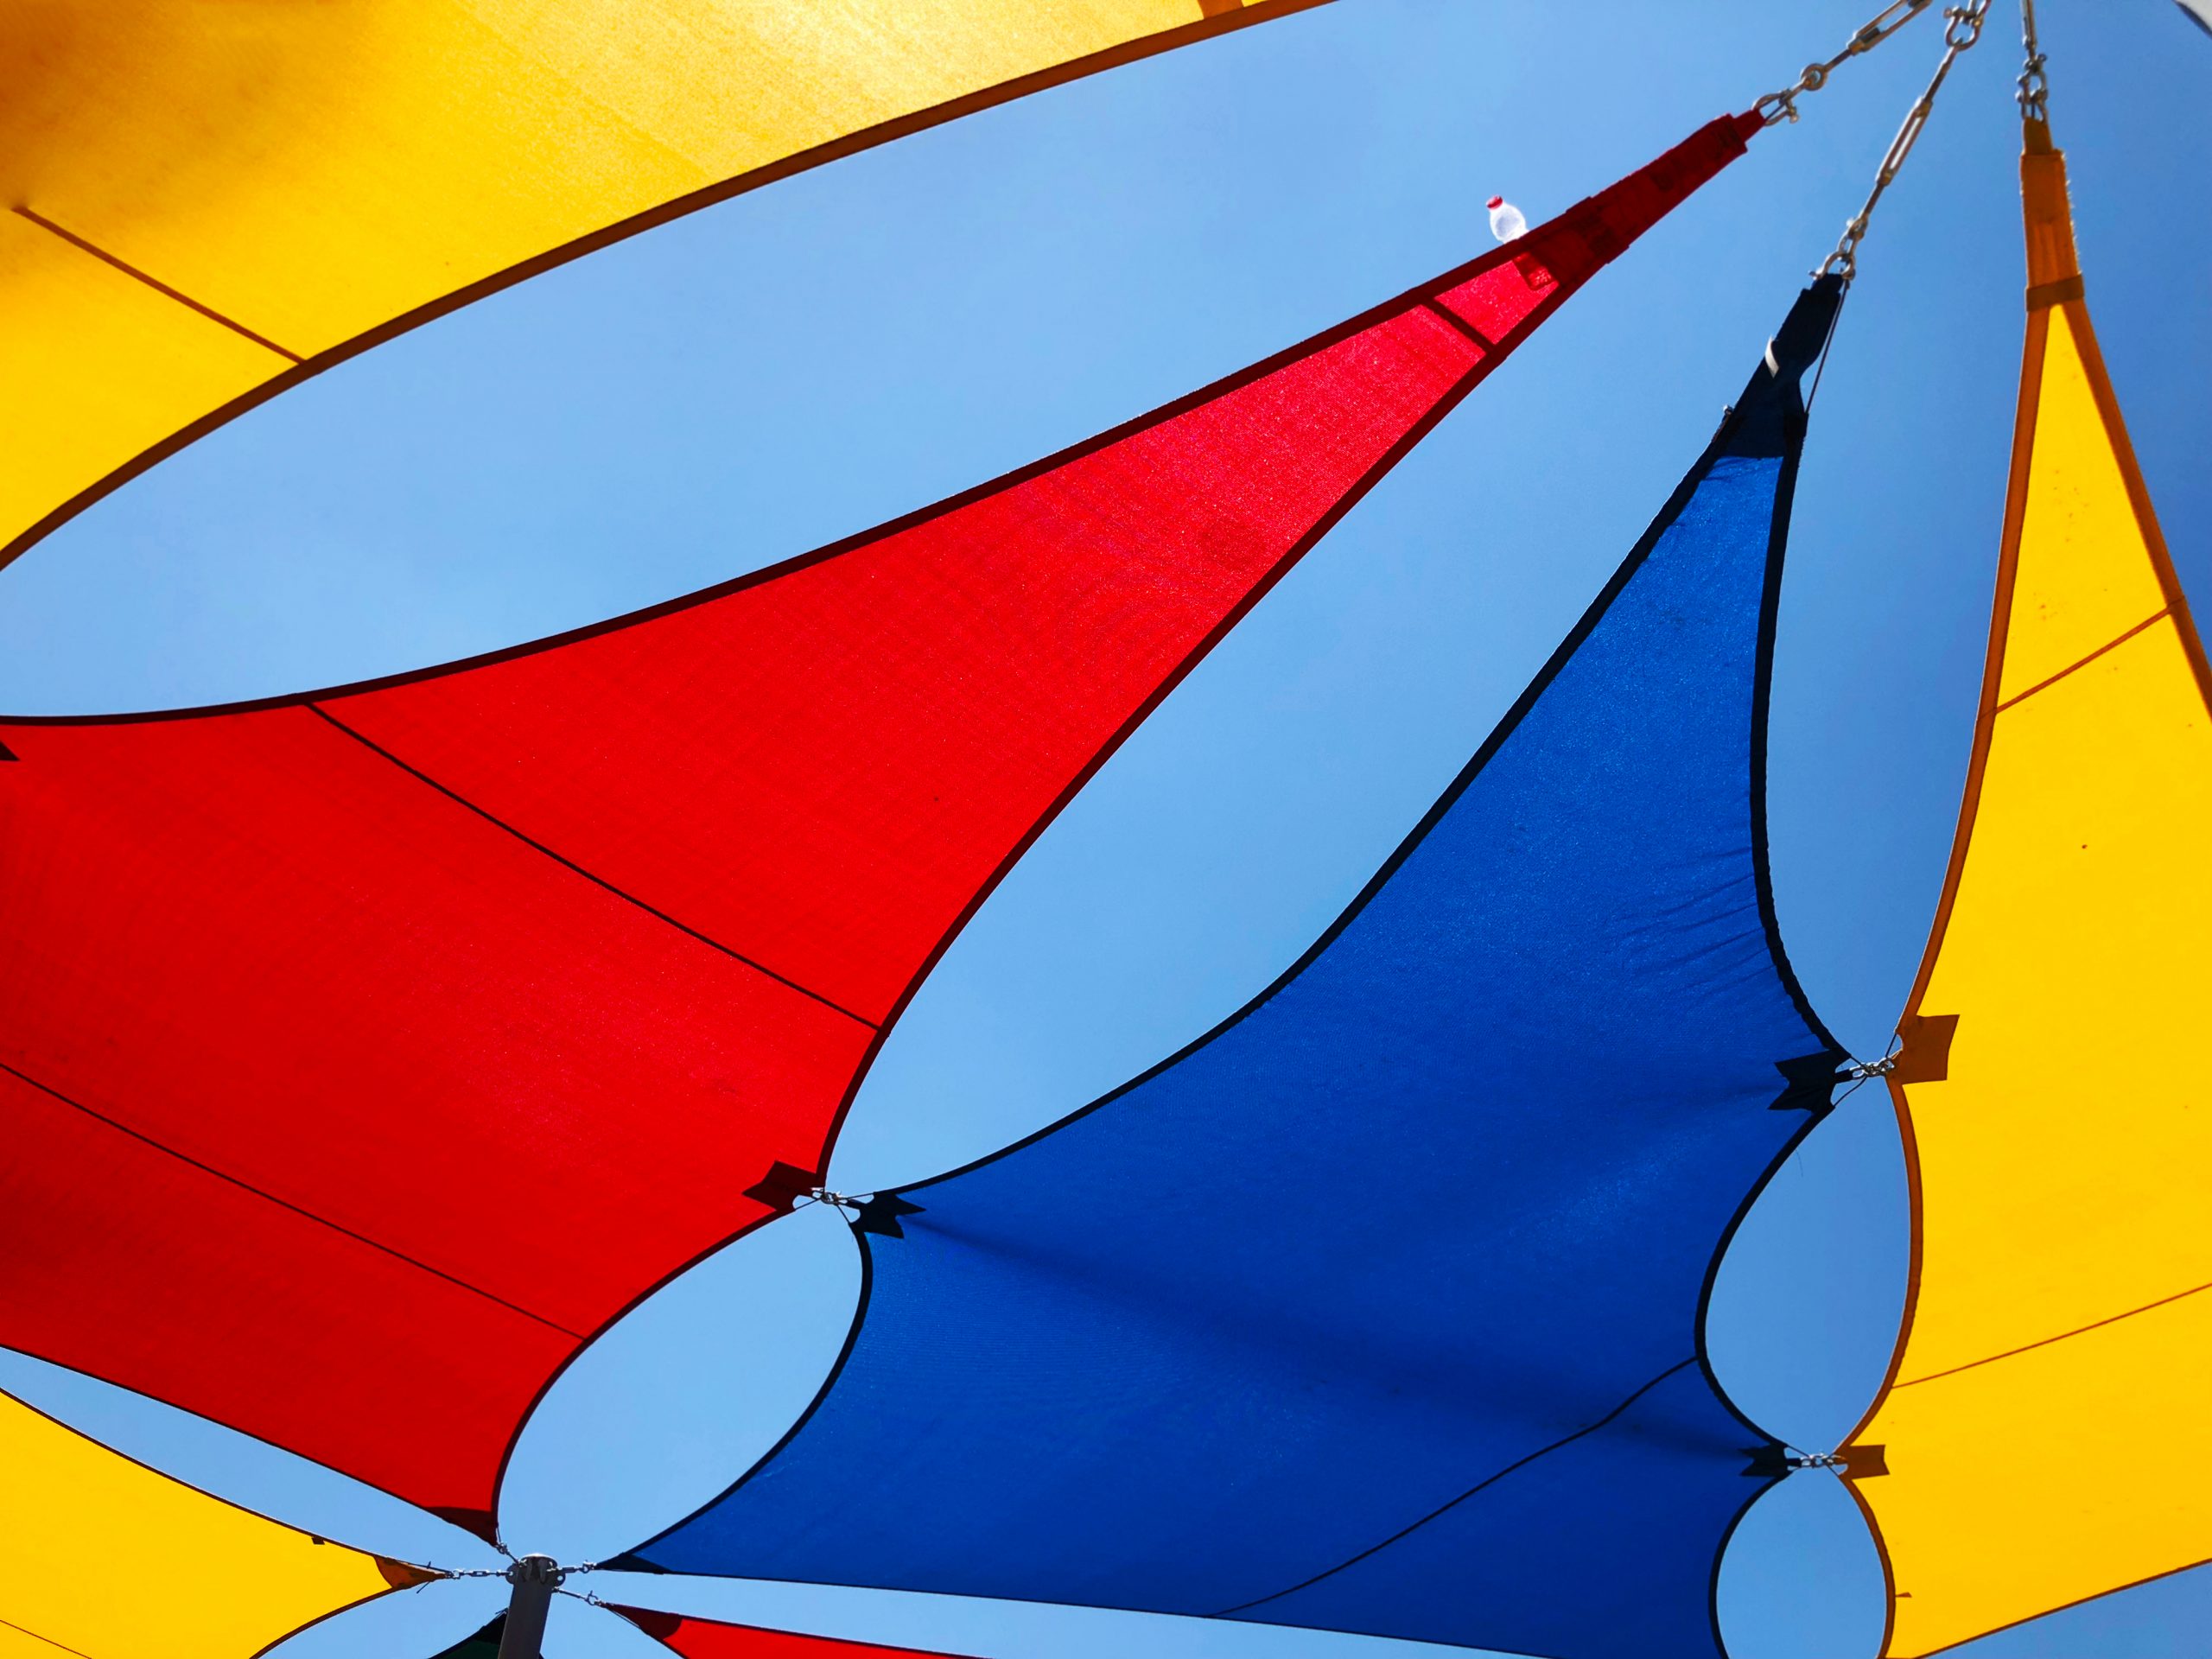 Custom shade sails in red, blue and yellow